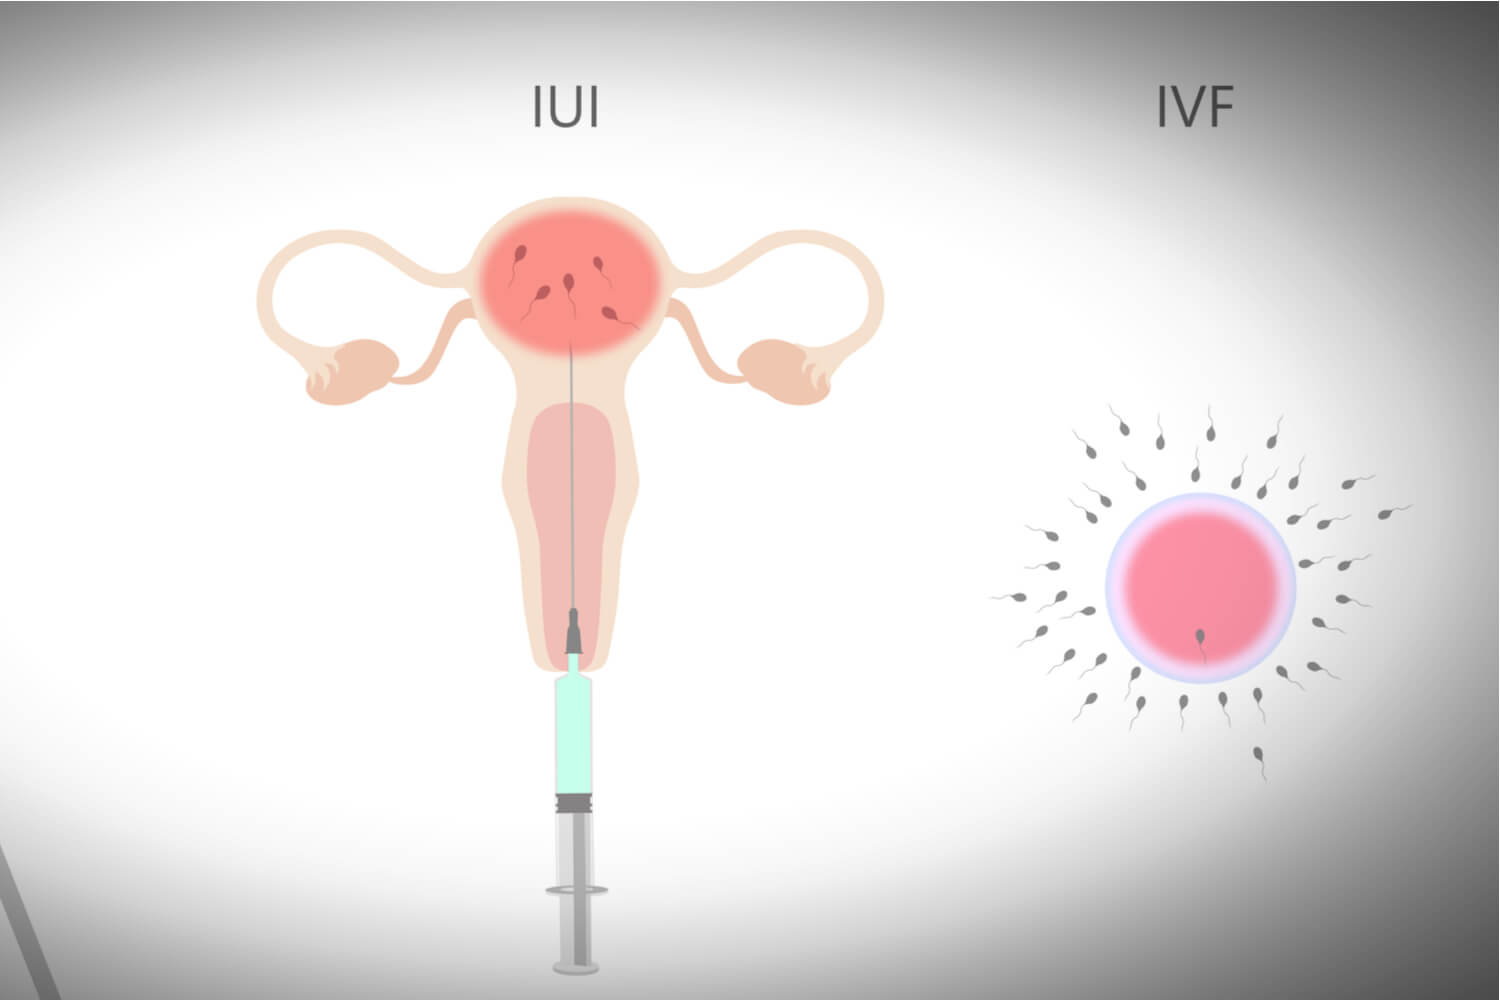 IVF and IUI